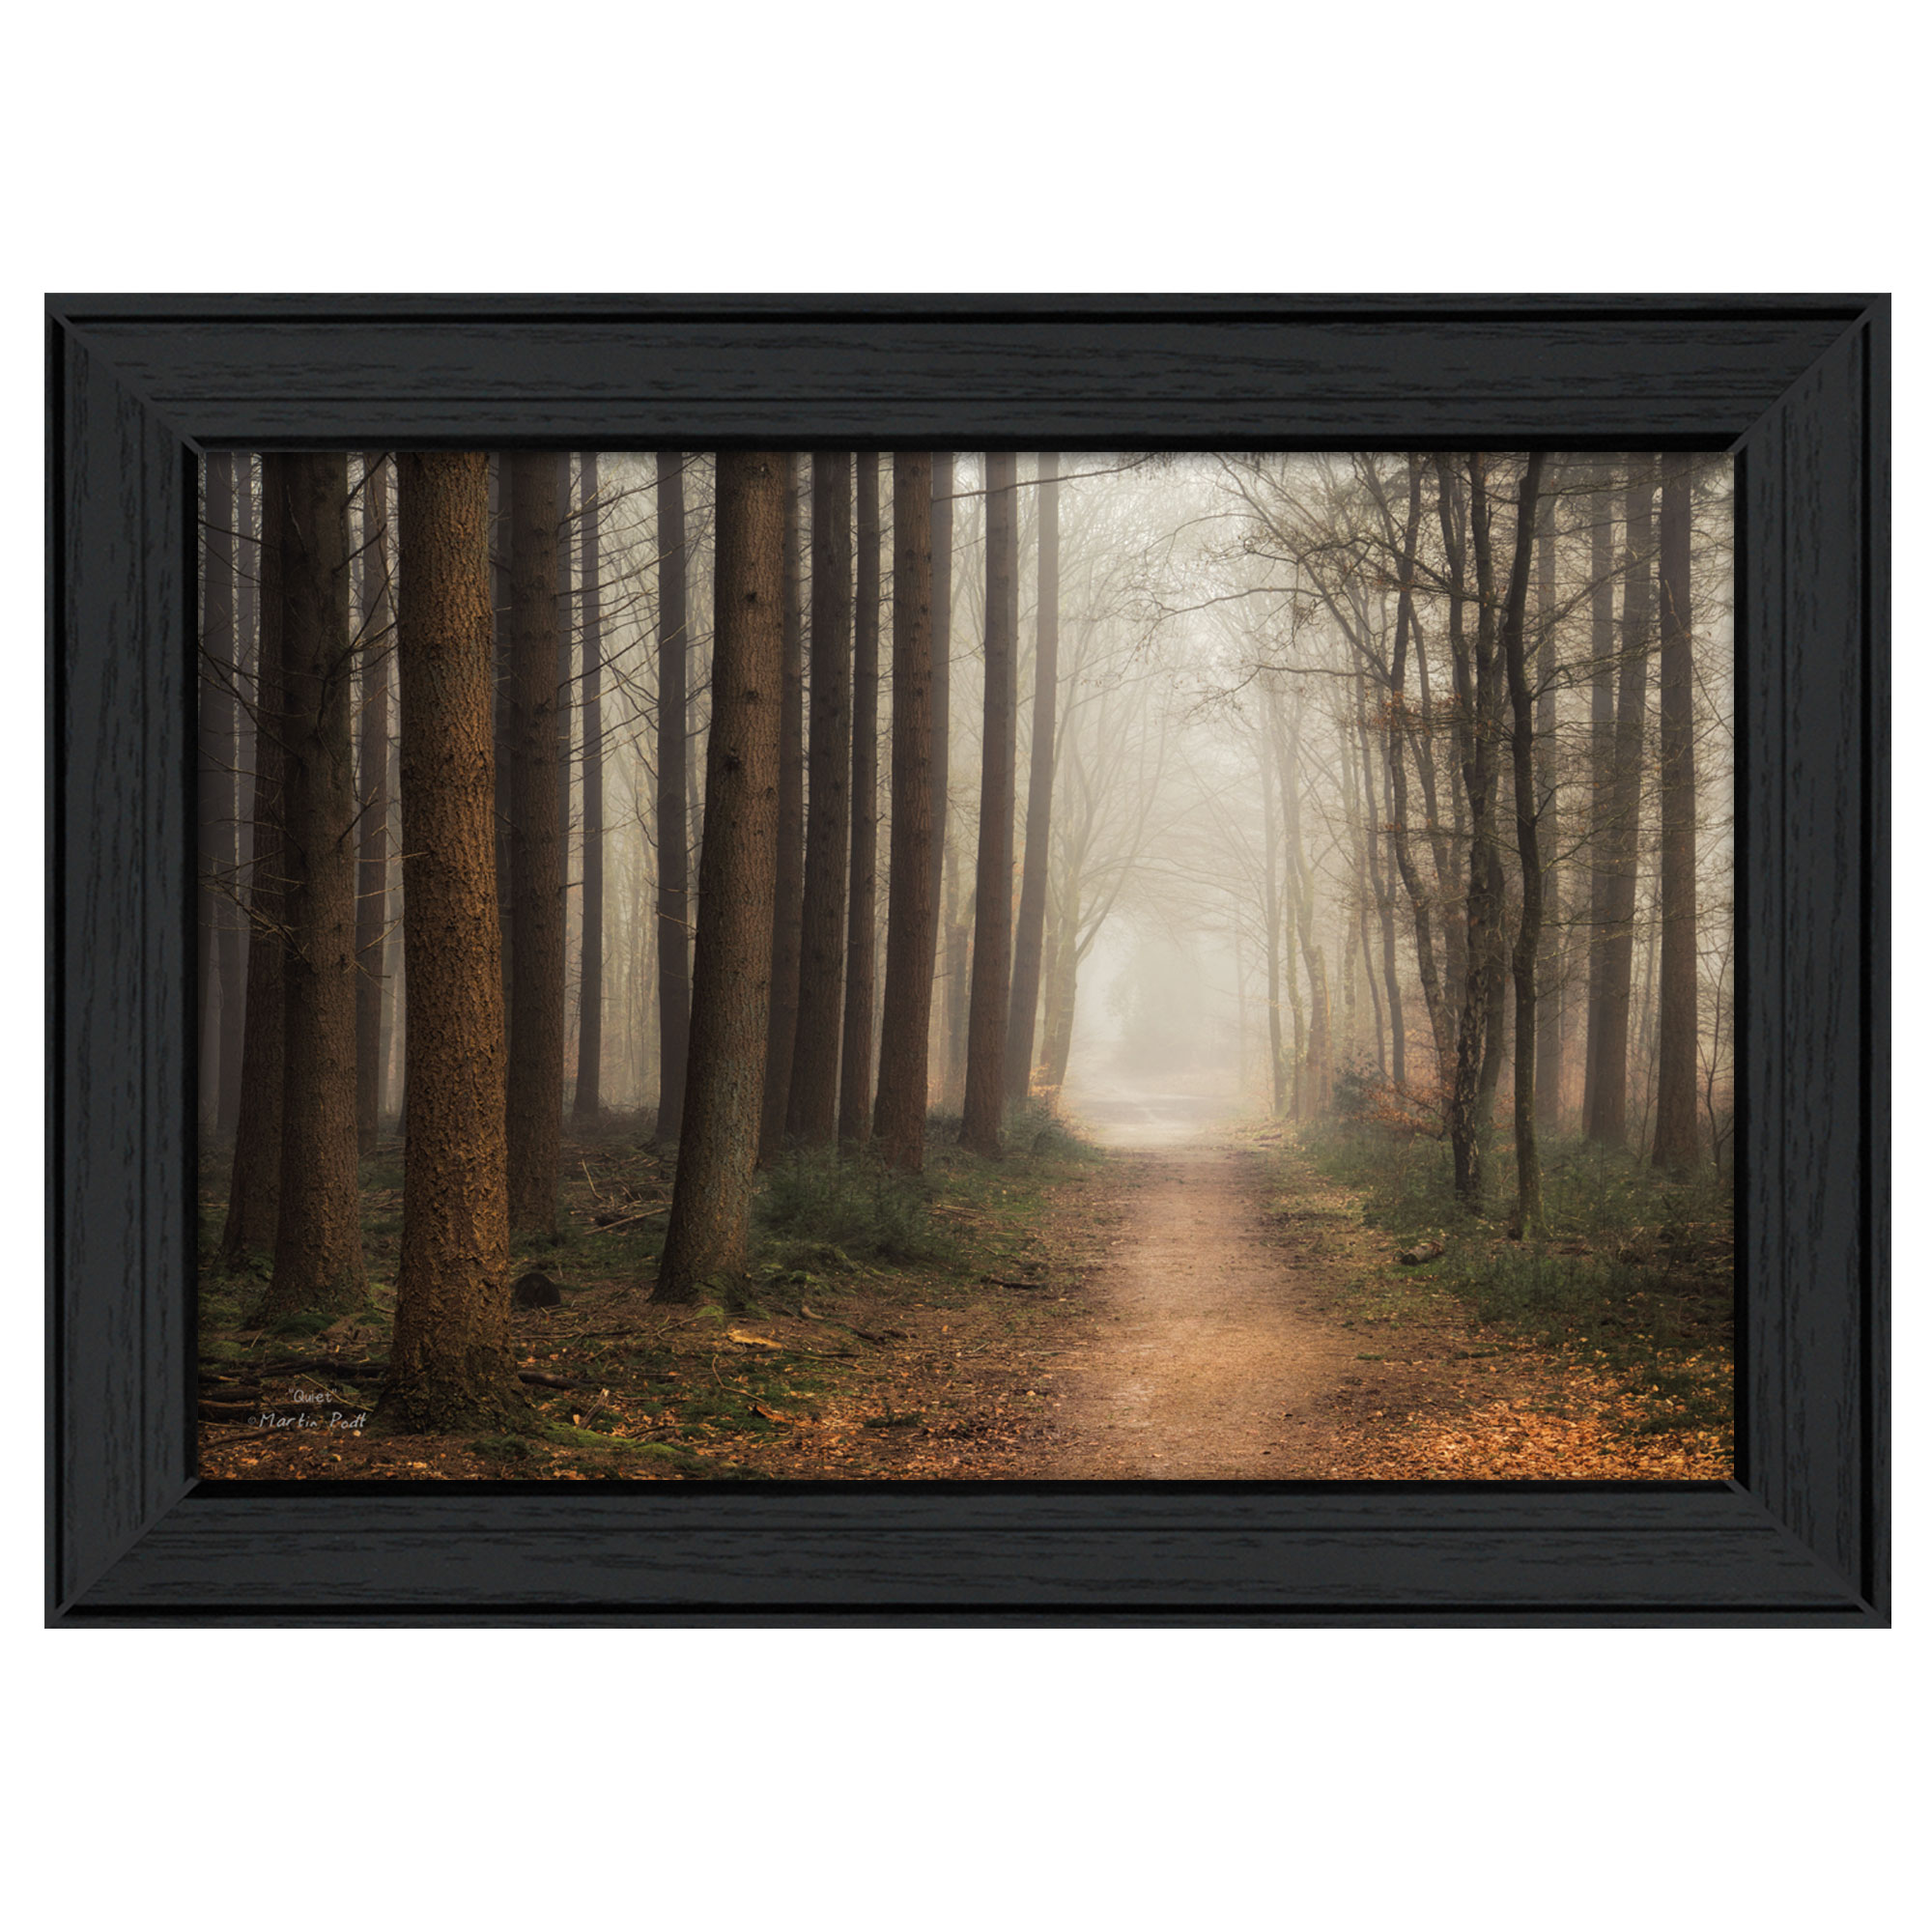 "Quiet" By Martin Podt, Printed Wall Art, Ready To Hang Framed Poster, Black Frame